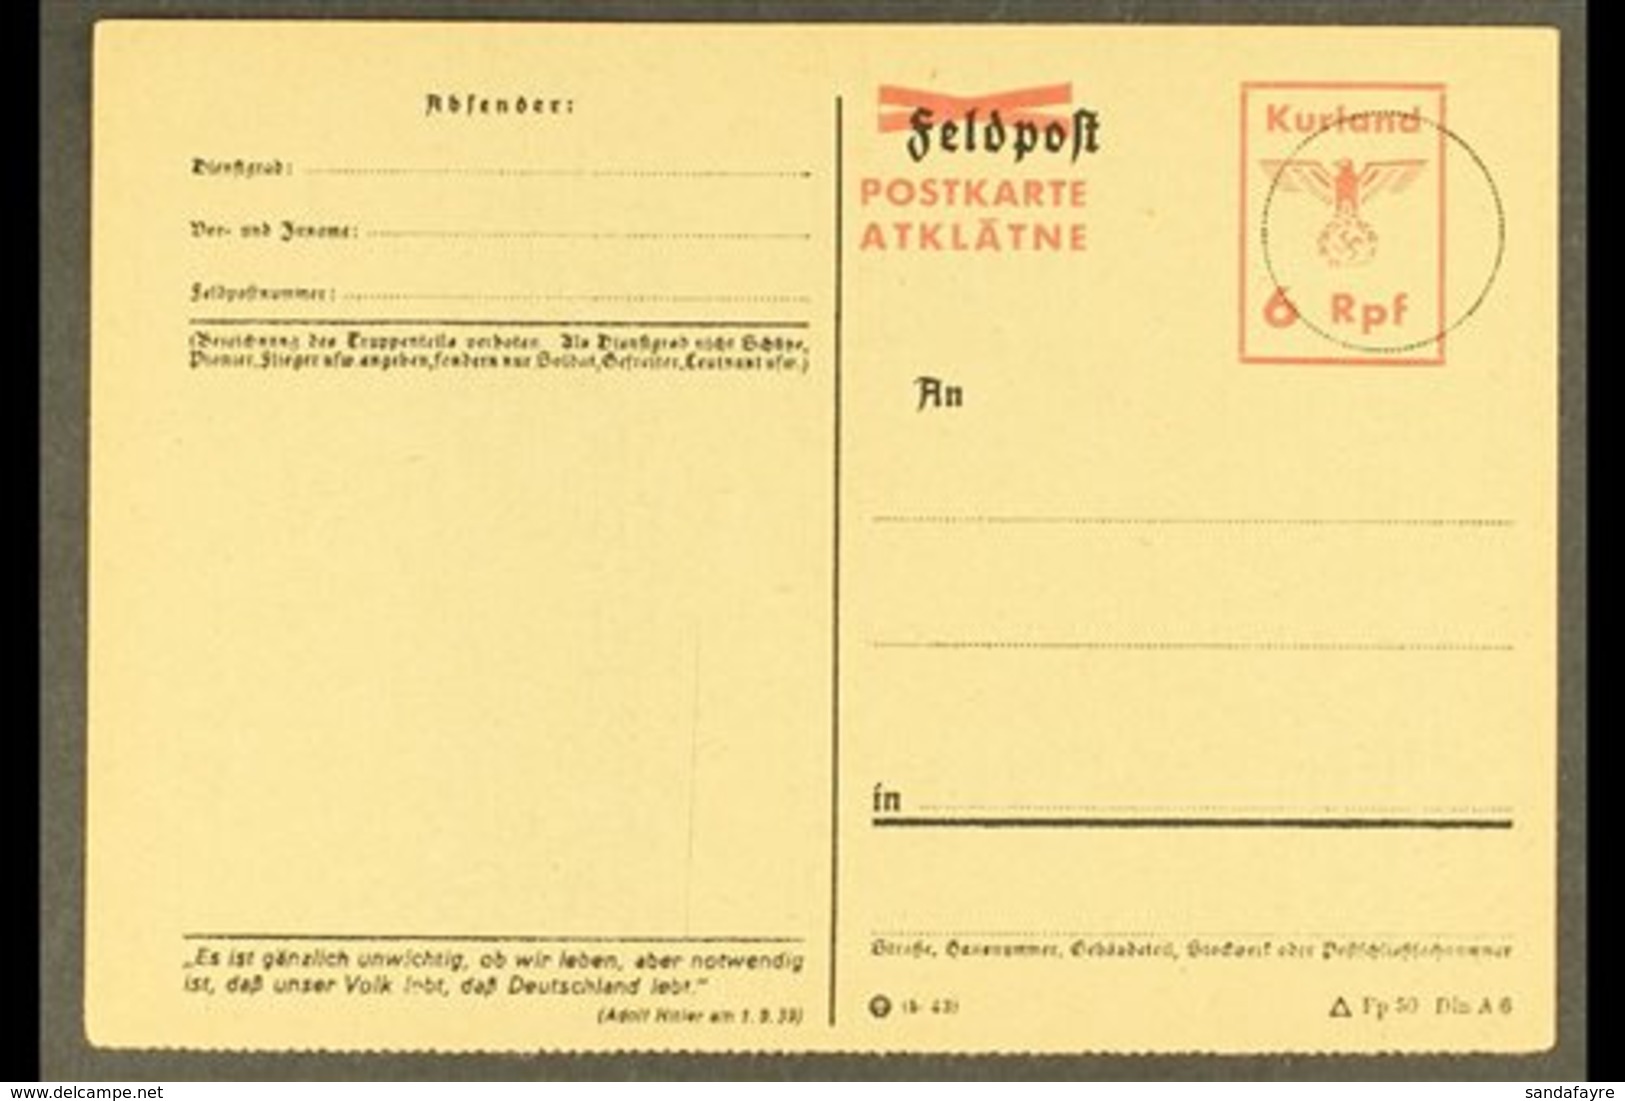 \Y KURLAND\Y 1945 "6 Rpf." Postal Stationery Postal Card With Red "Postkarte / Atklatne" Overprint And Adolf Hitler Quot - Autres & Non Classés